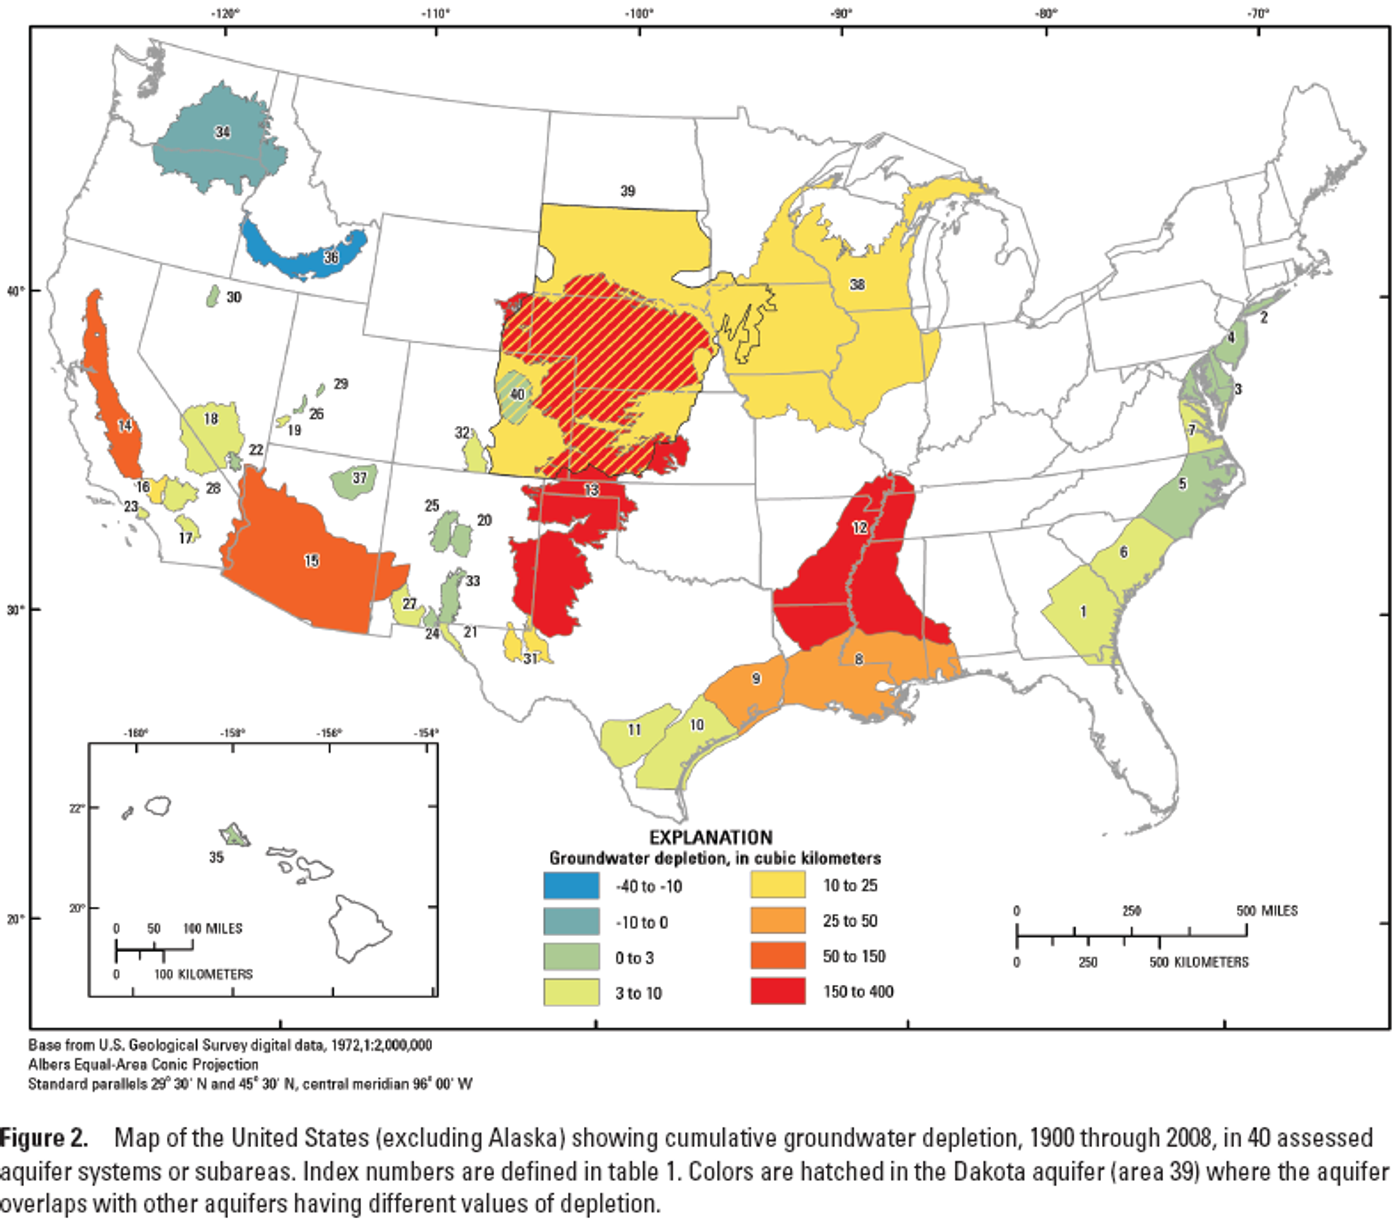 Groundwater depletion in cubic kilometers in the US. Photo: USGS